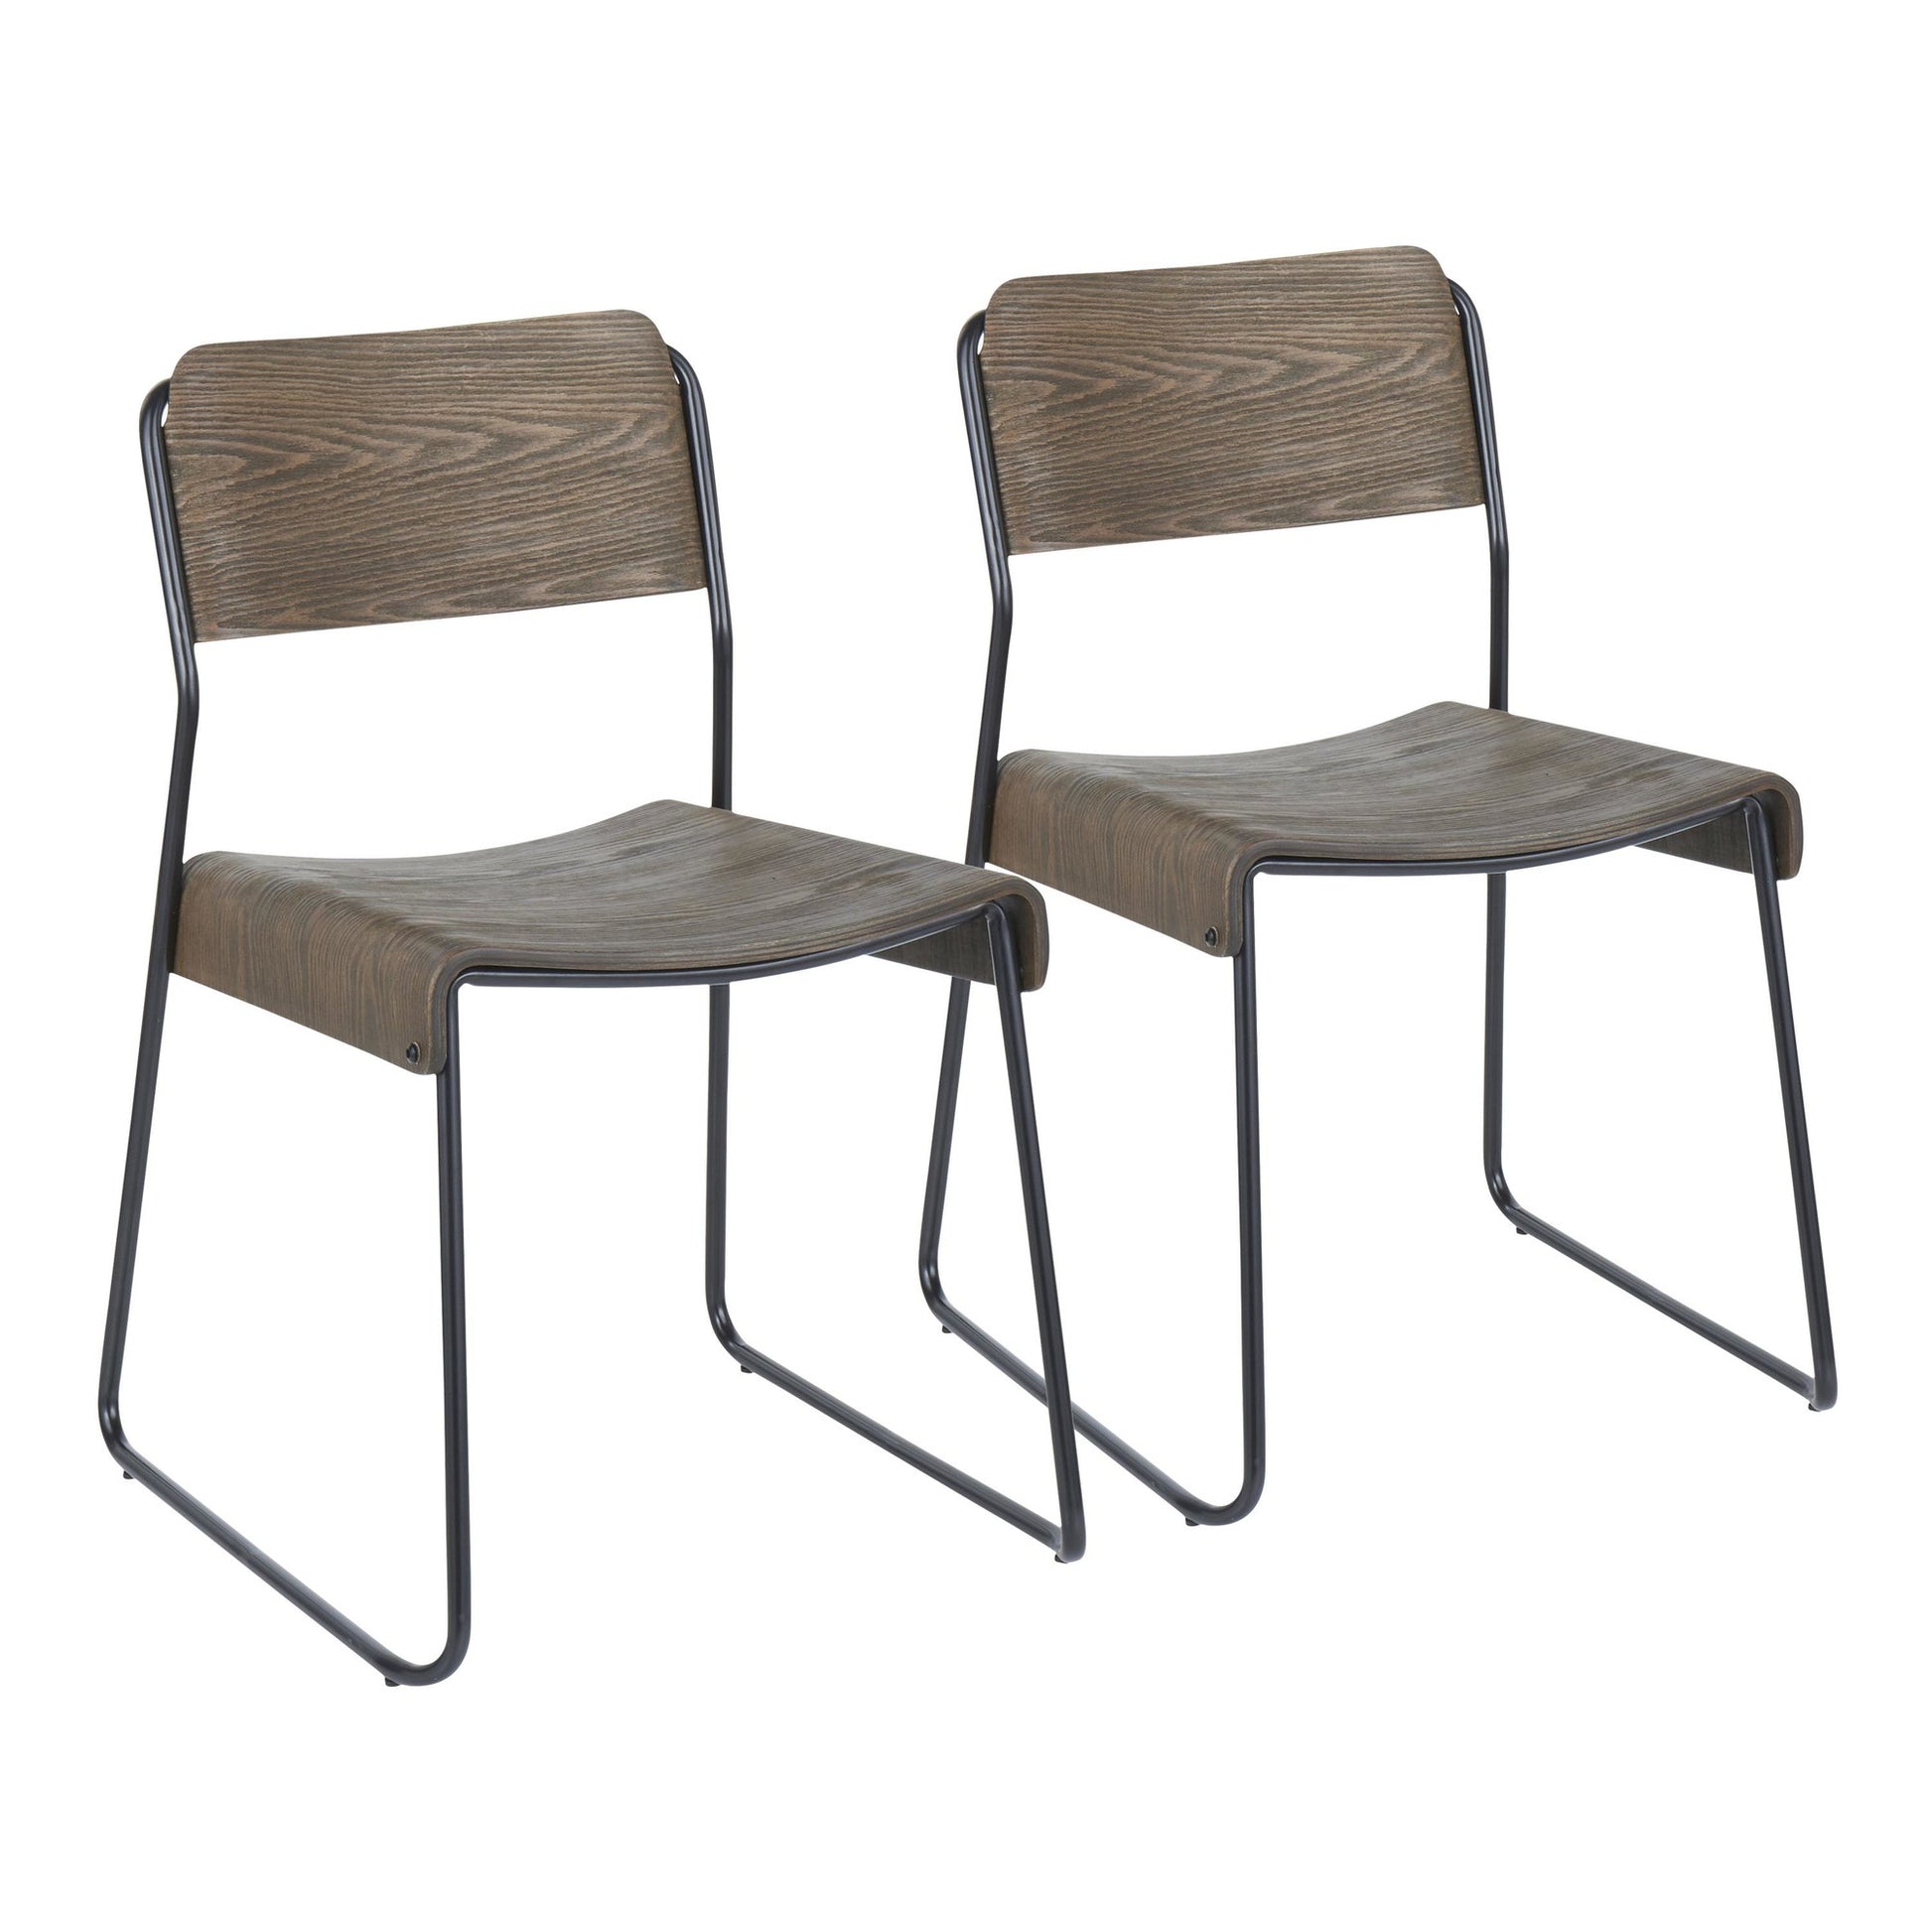 LumiSource Dali Industrial Chair - Set of 2-3